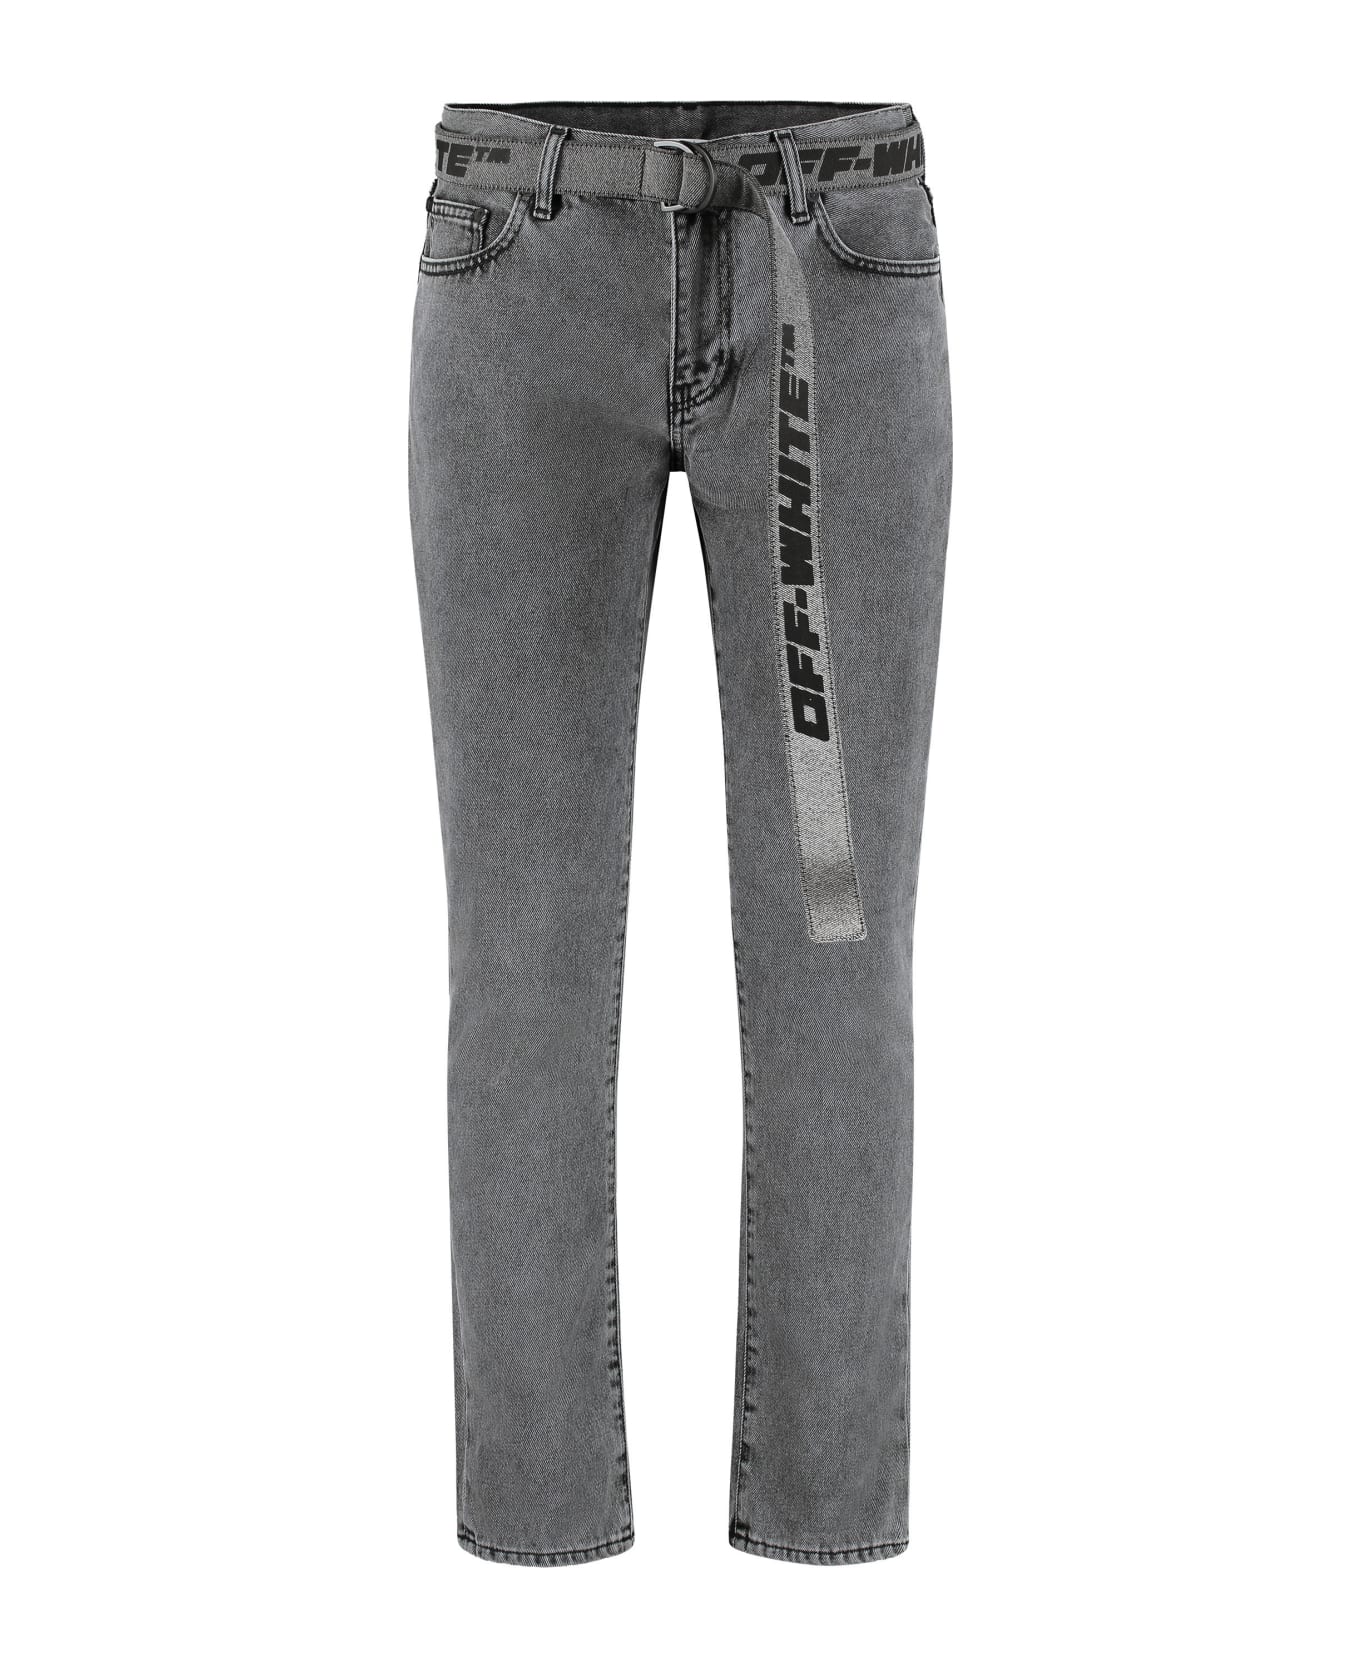 Off-White Belted Skinny Jeans - grey